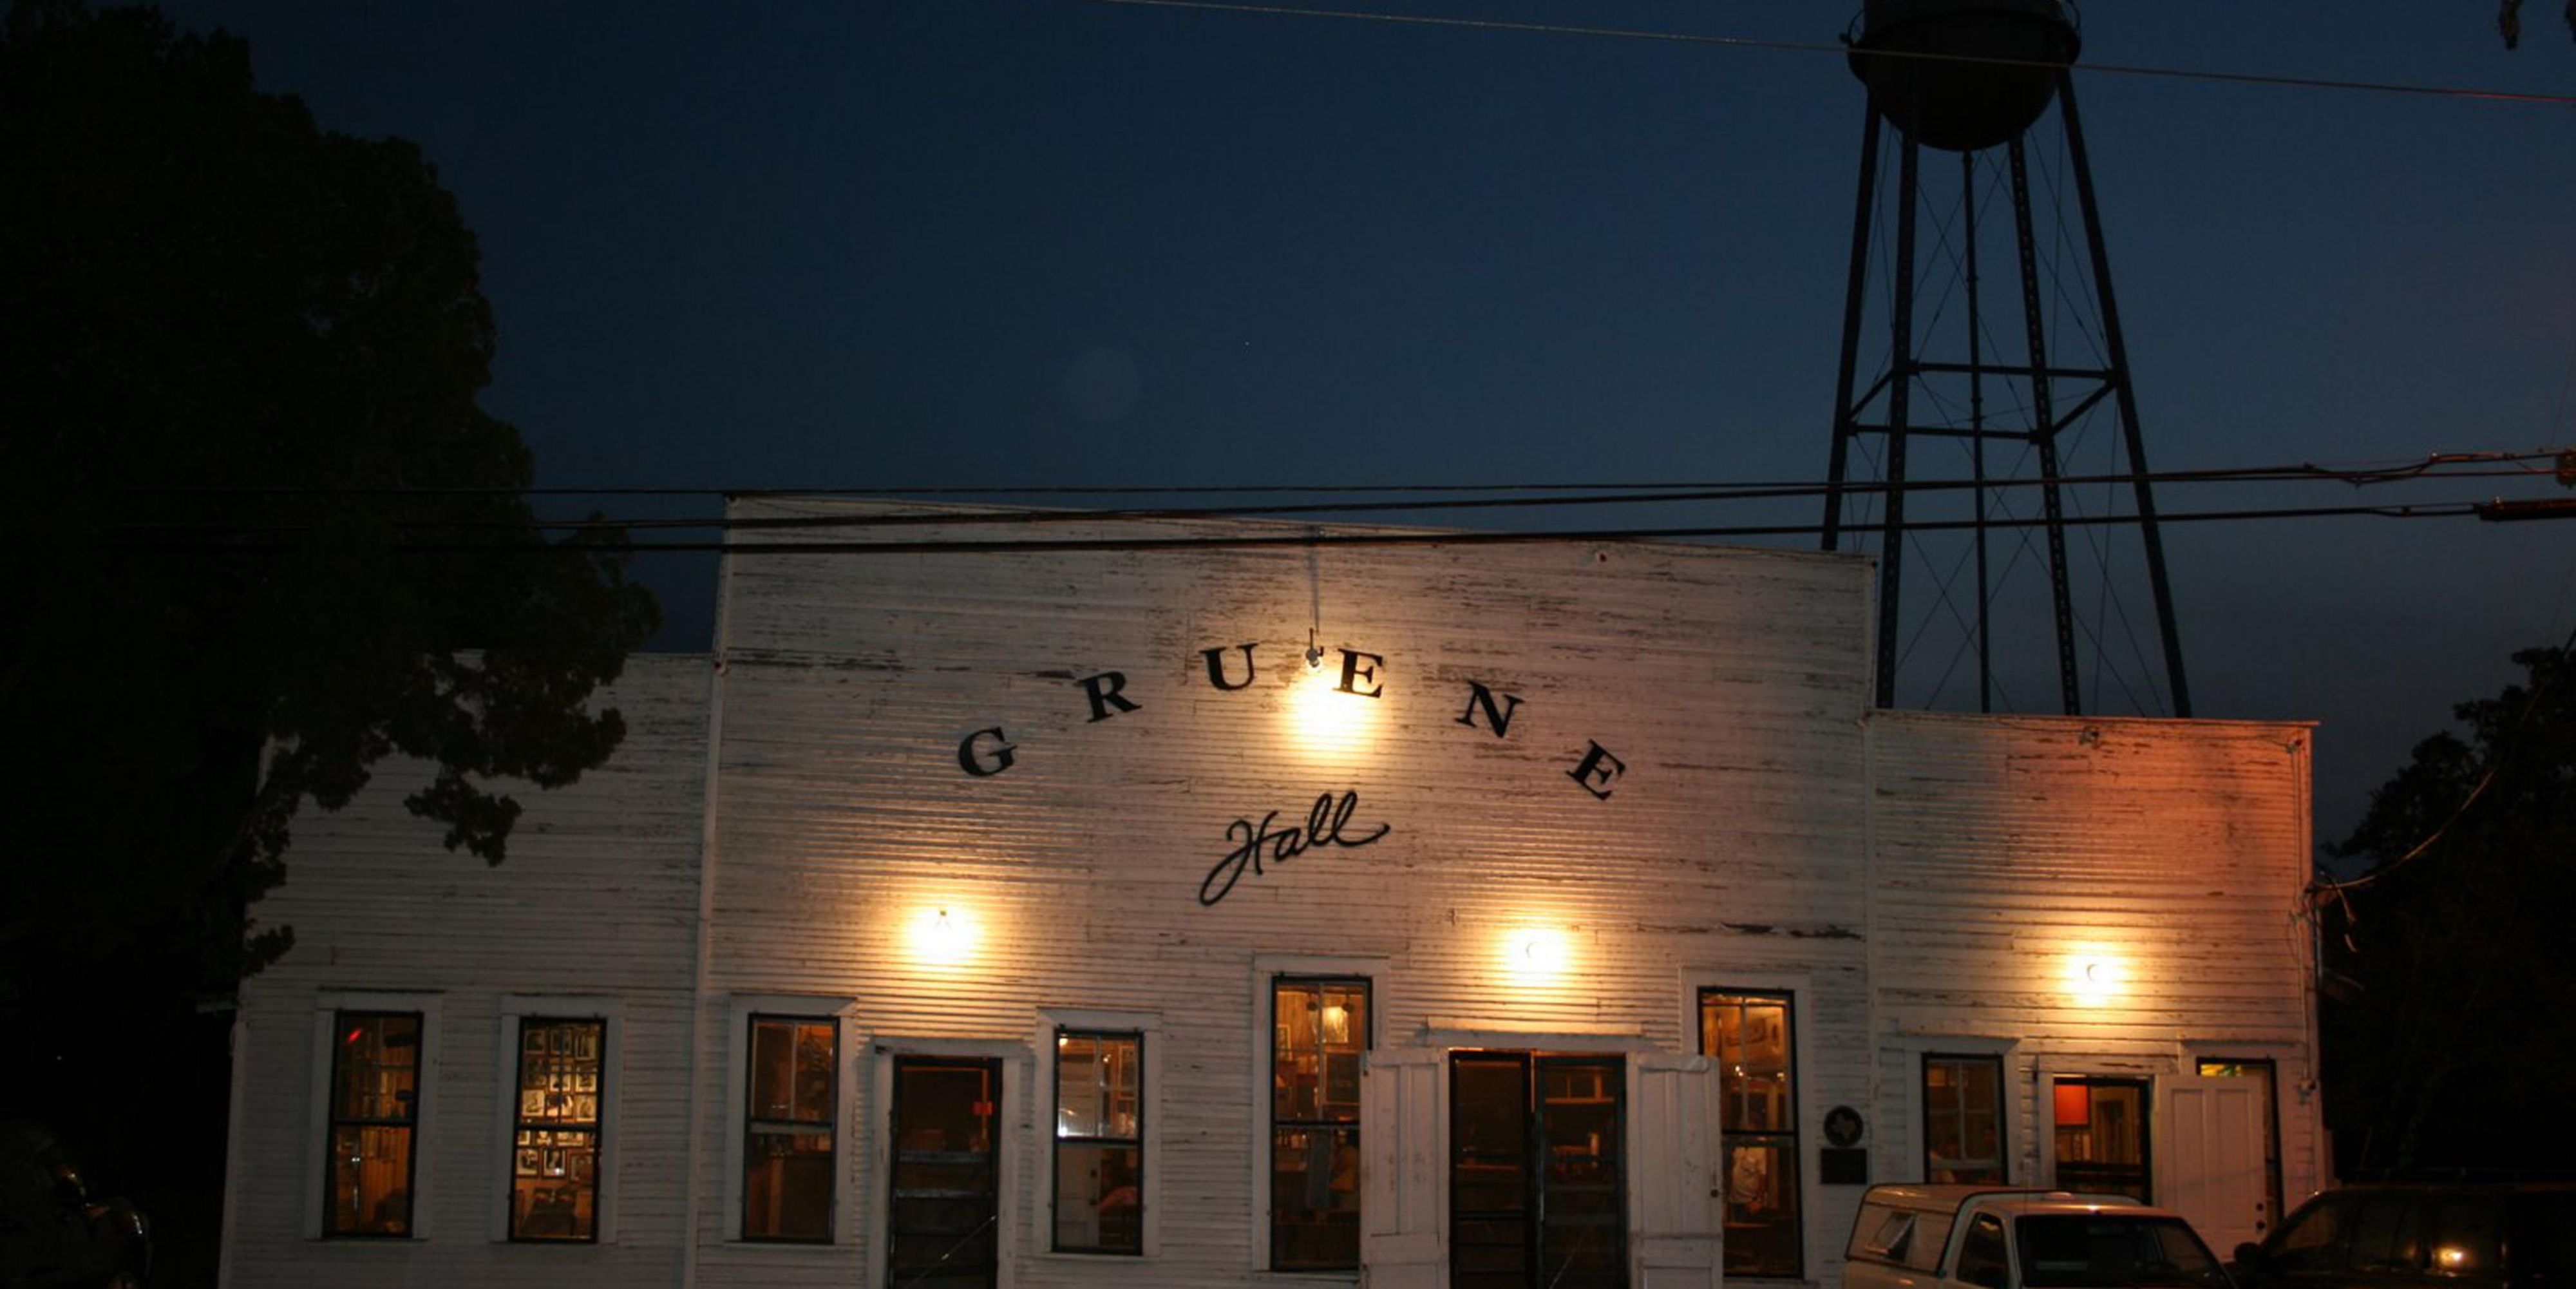 Texas' Oldest Dance Hall, located at historic Gruene in New Braunfels, features Texas' best live music every day.